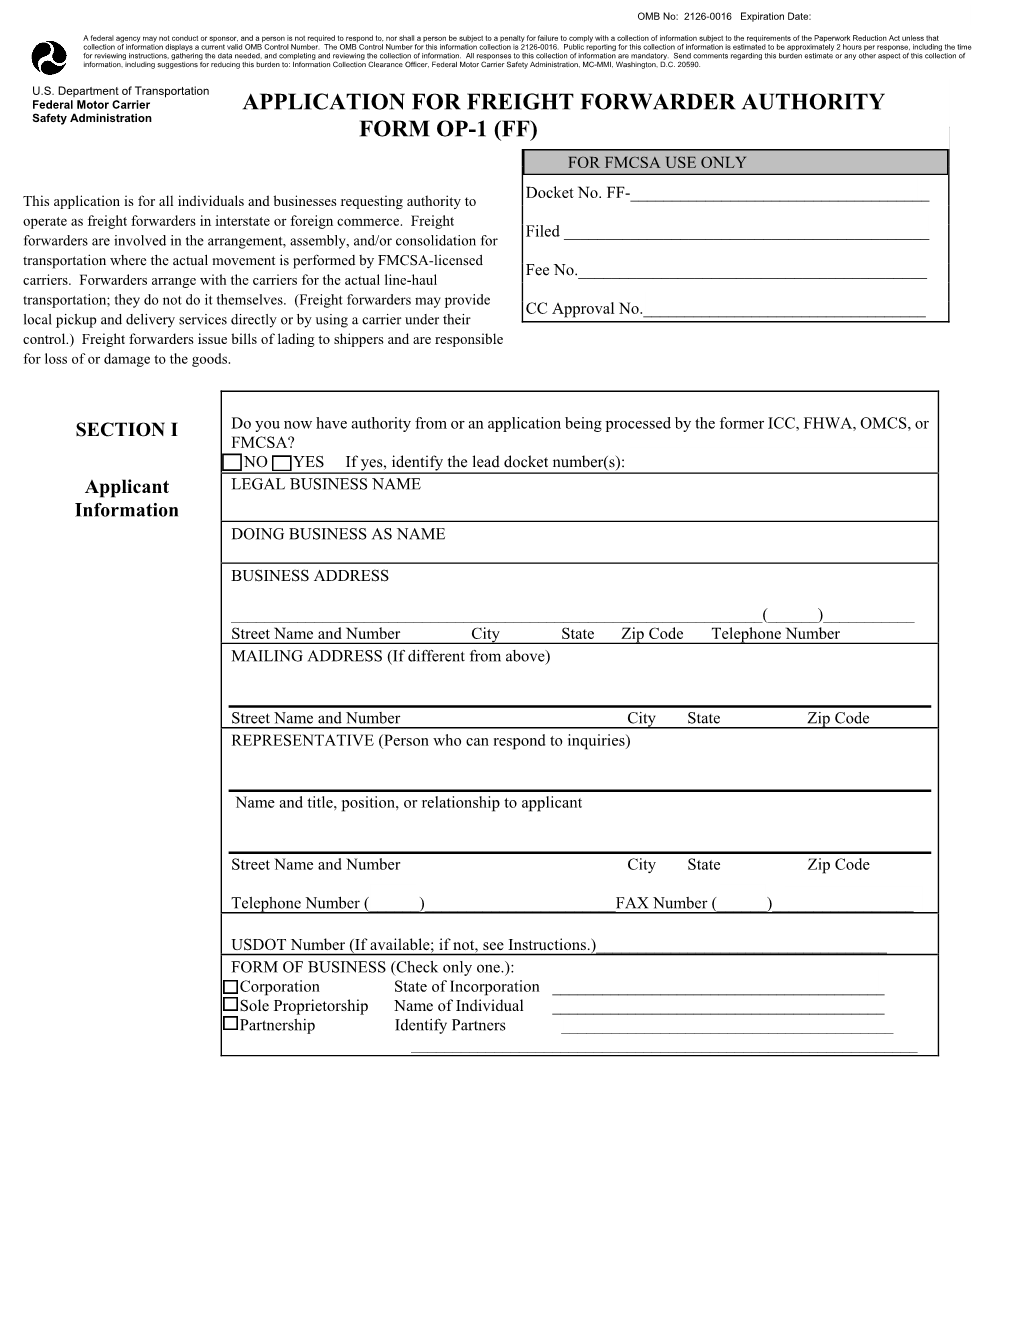 Application for Freight Forwarder Authority